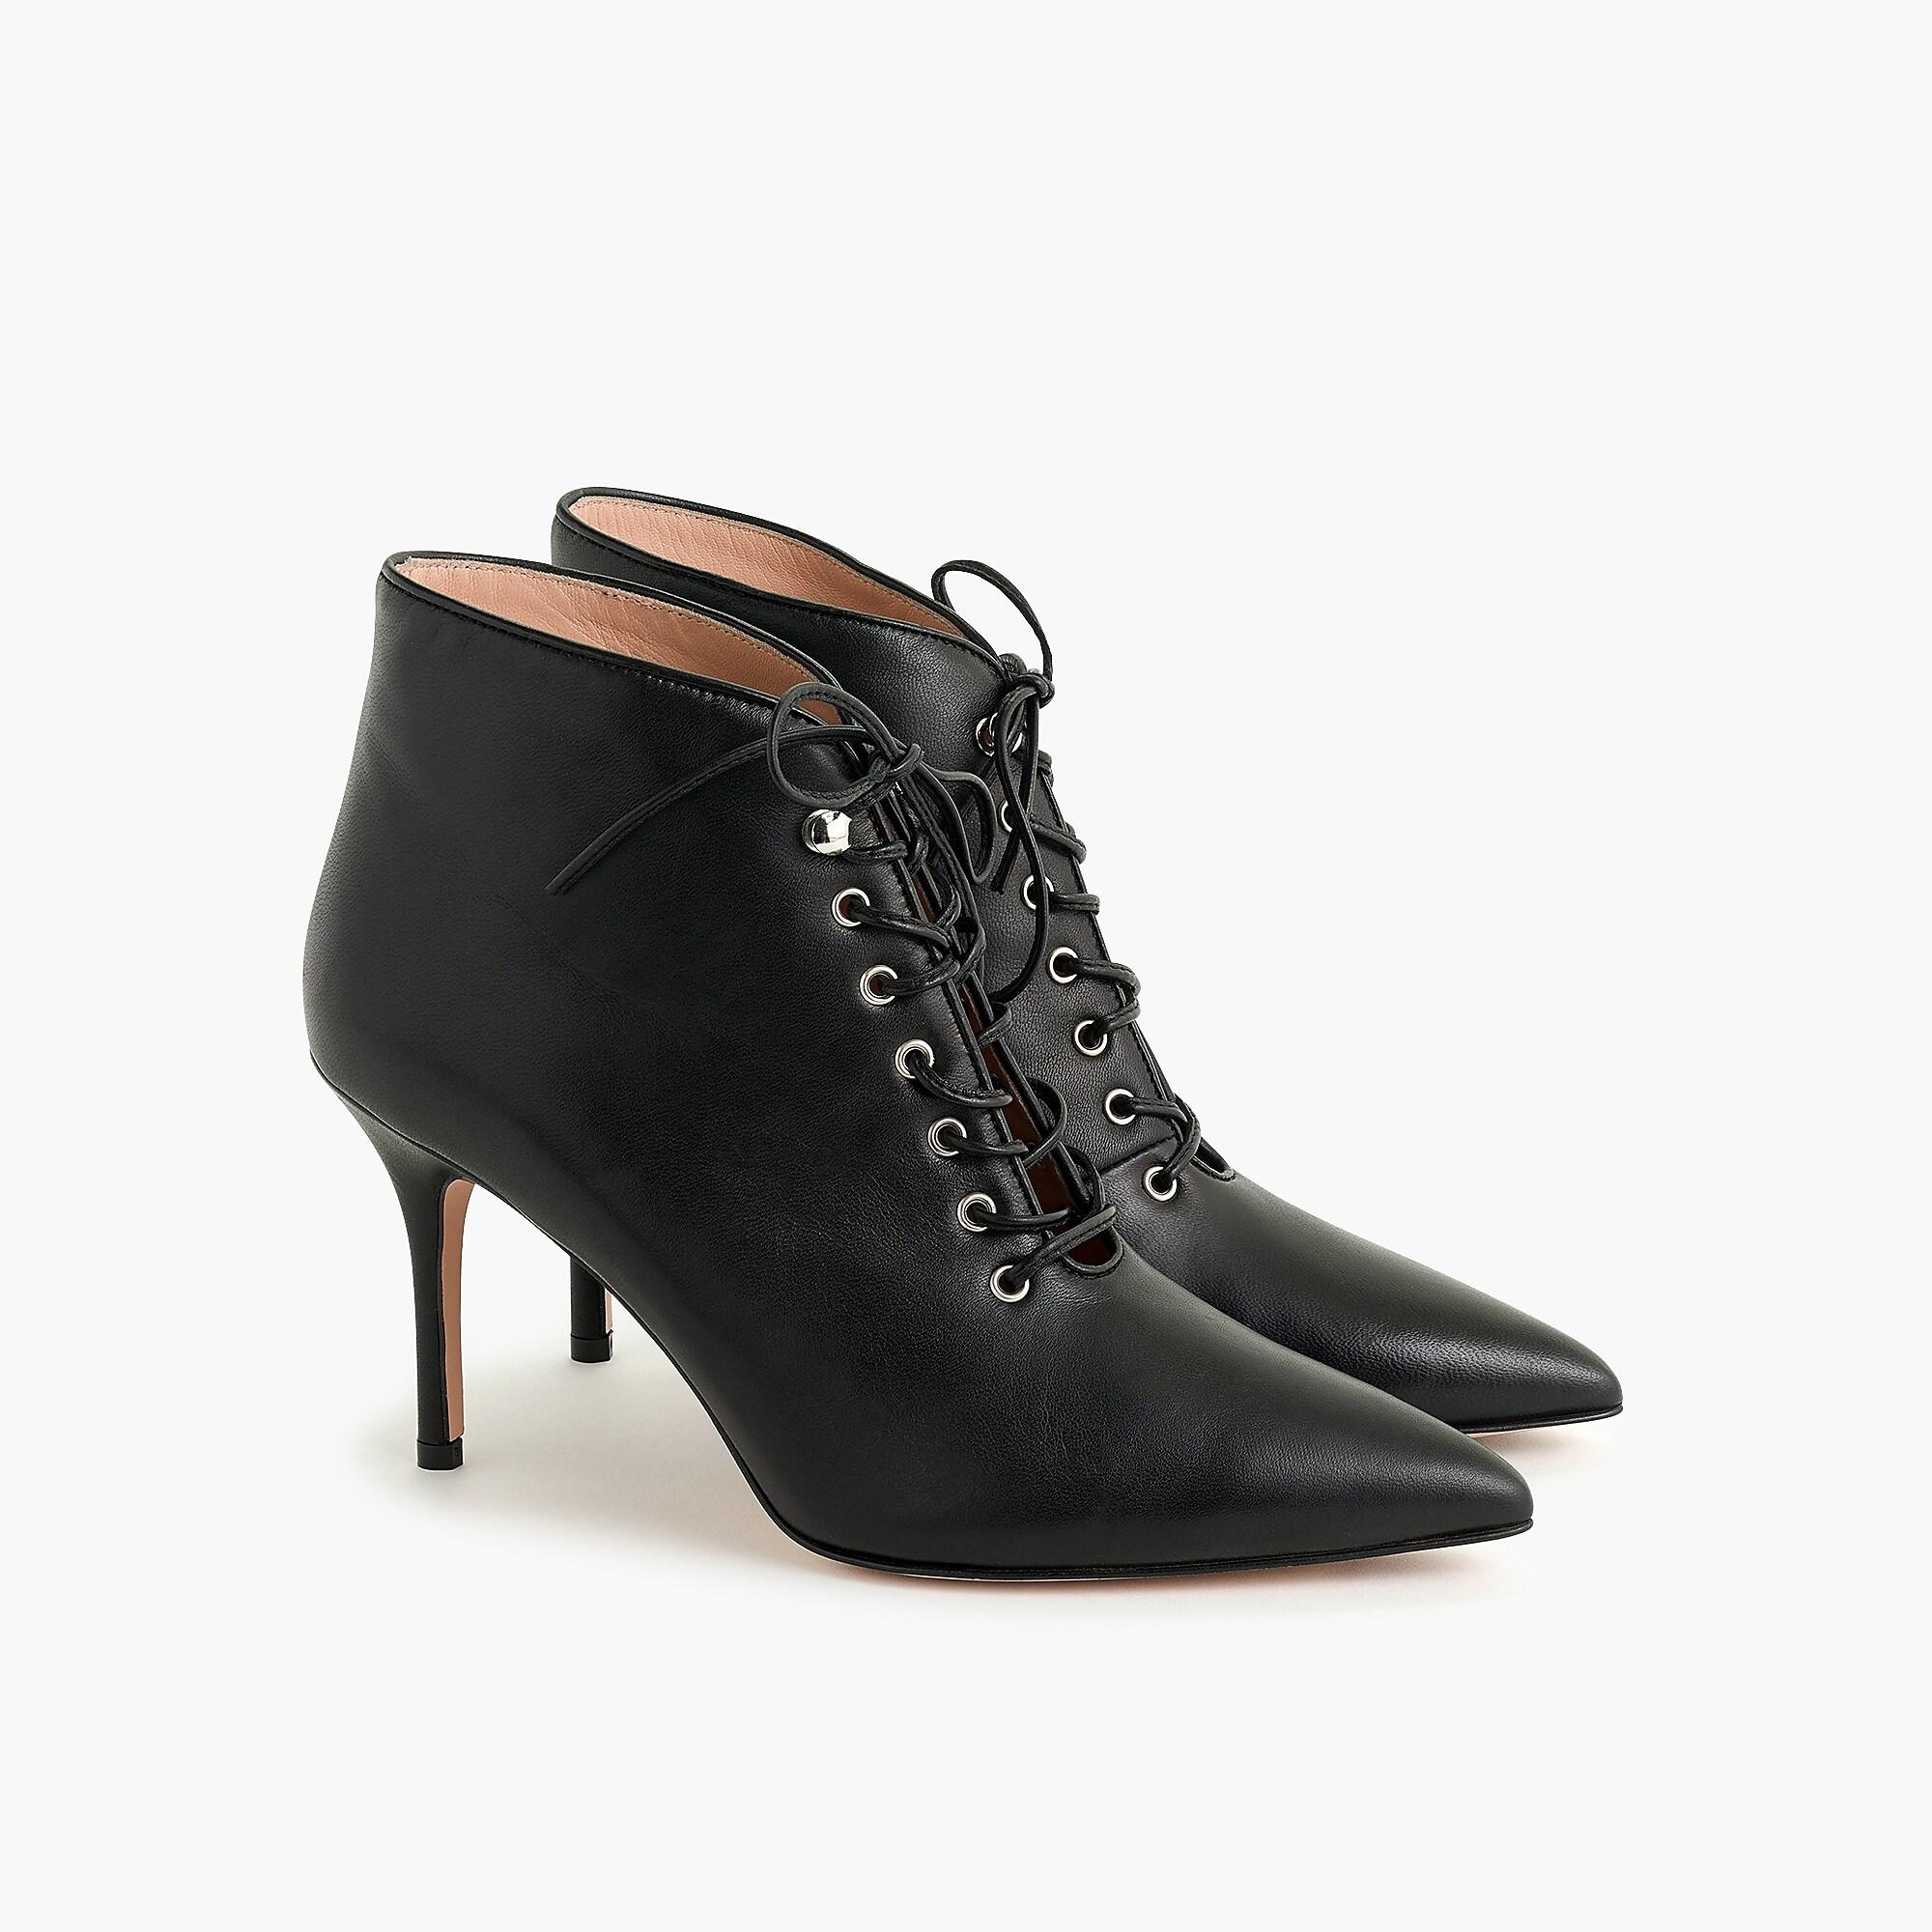 J.Crew Leather Elsie Lace-up Boots in Black - Lyst